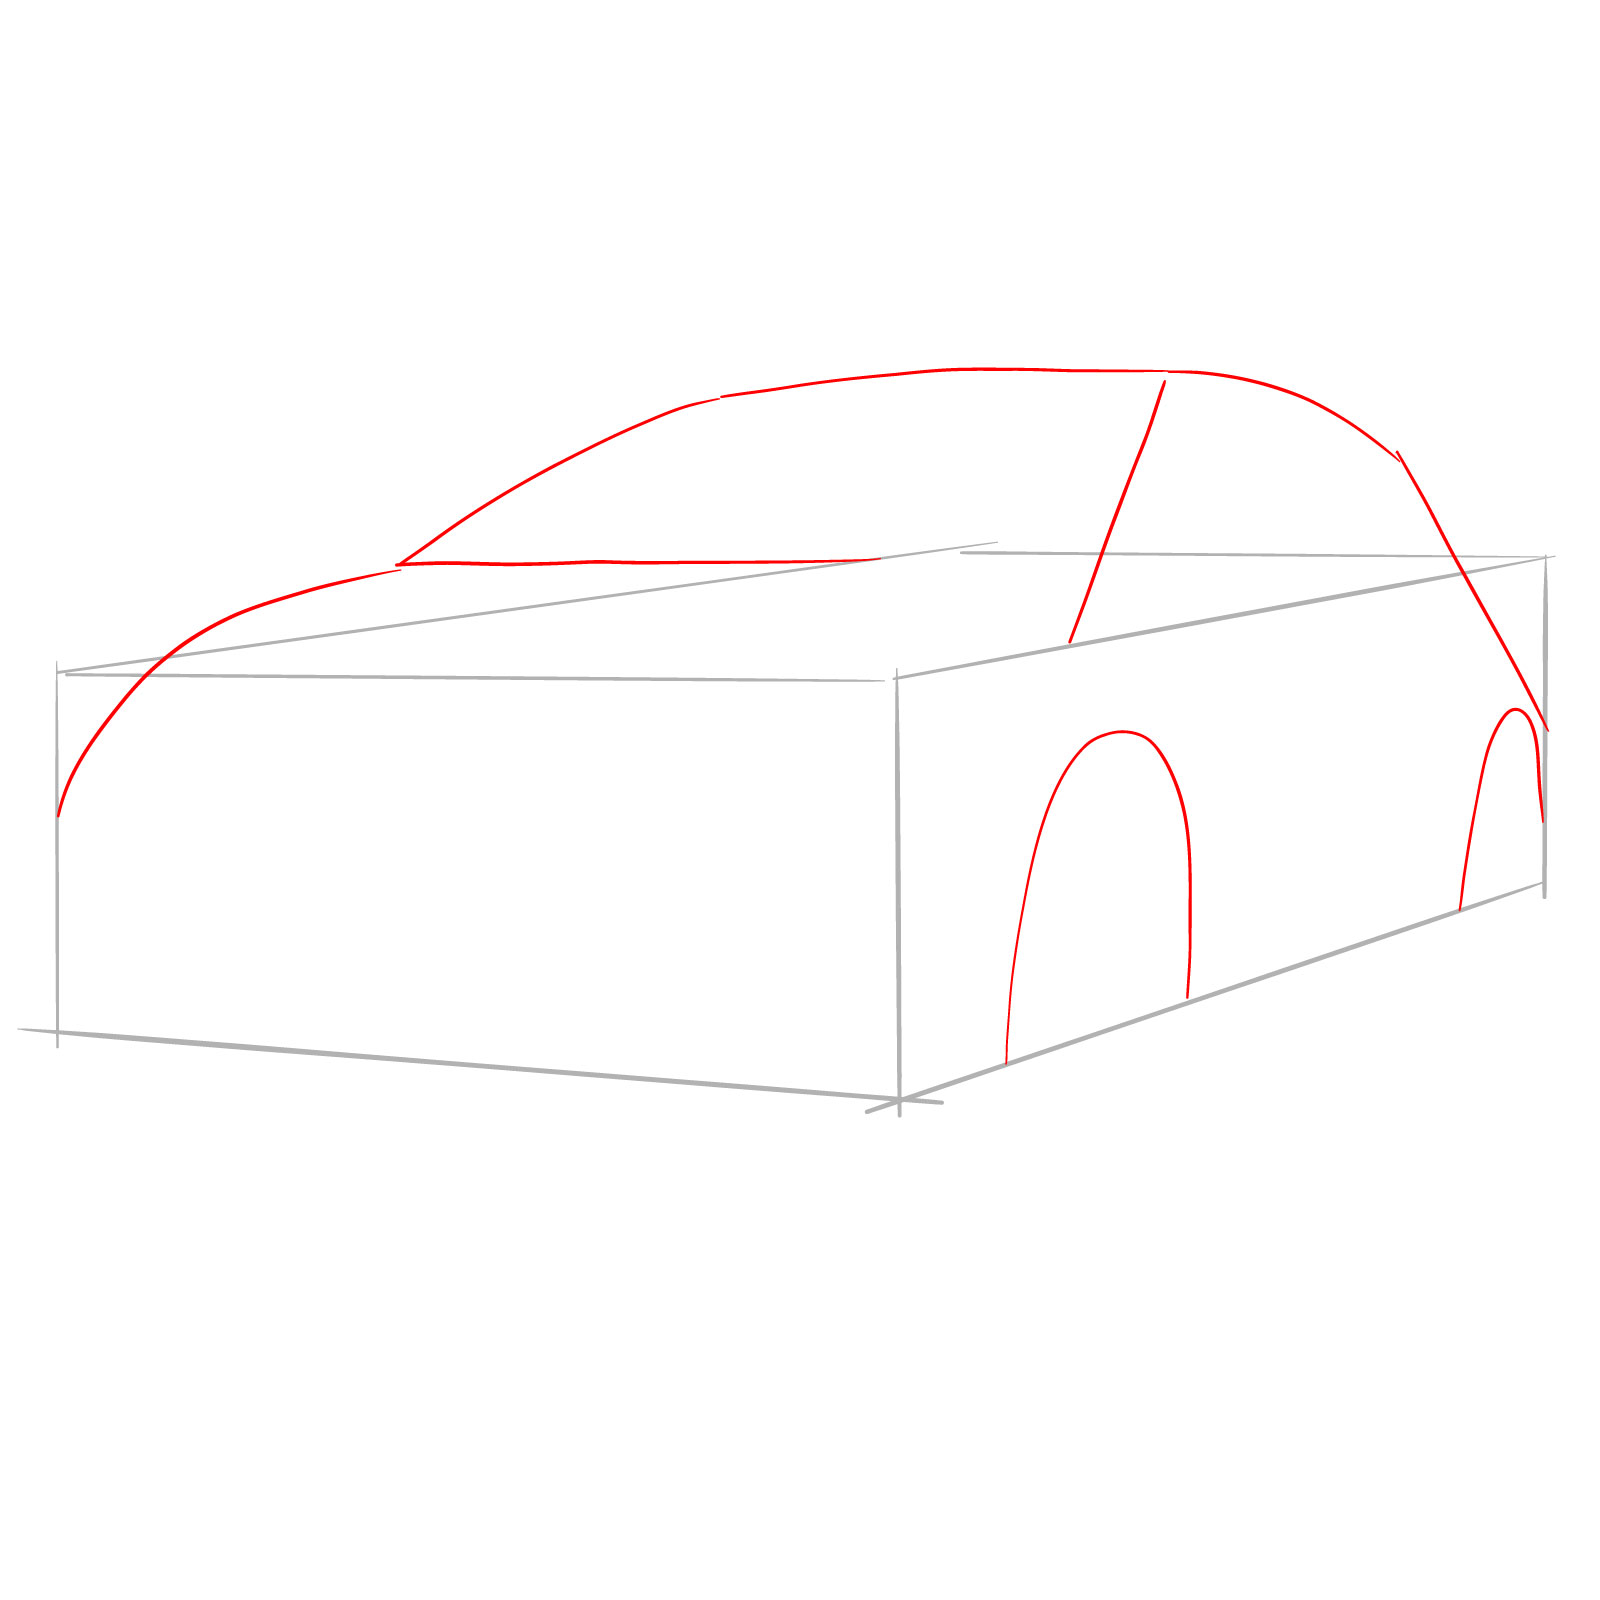 How to draw a 2021 Toyota Corolla - step 02